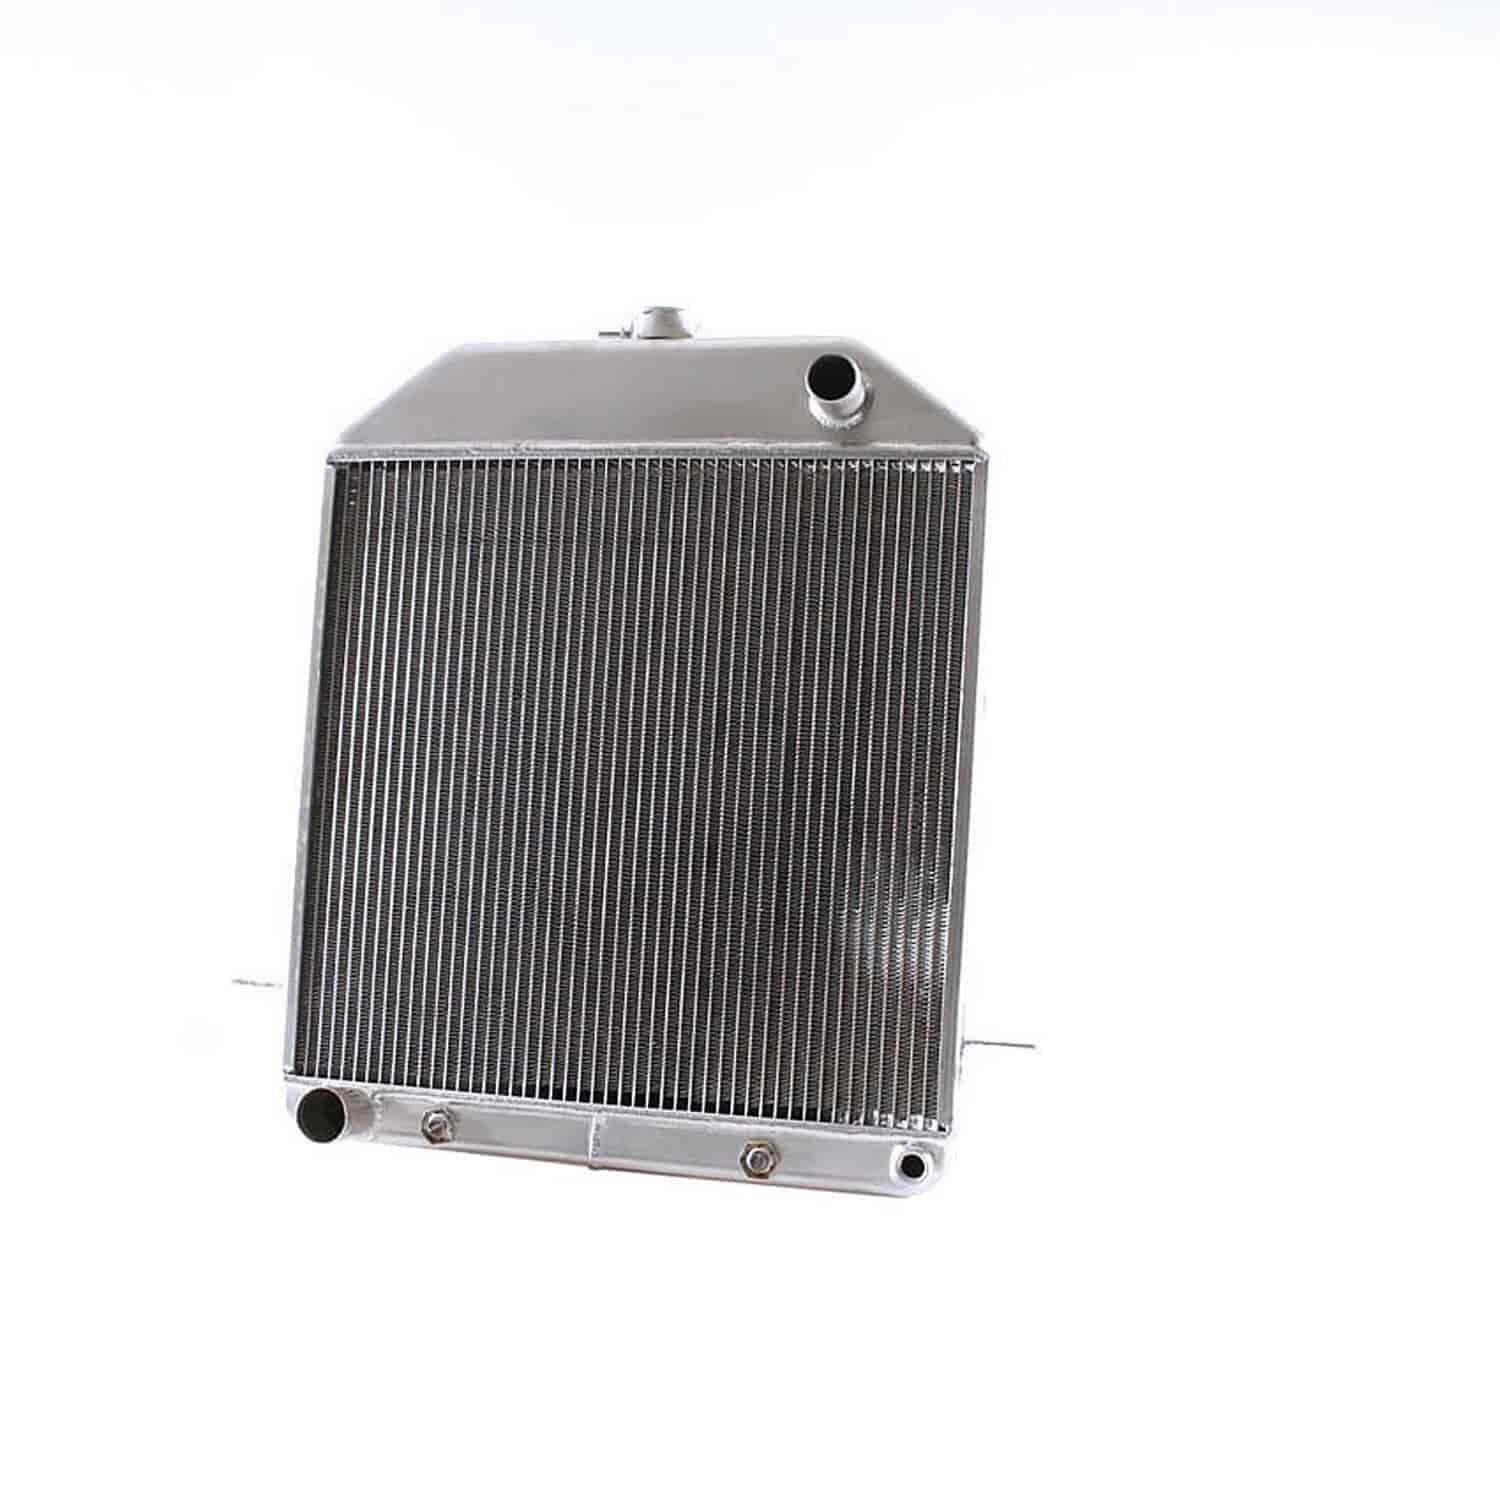 ExactFit Radiator for 1939-1940 Ford Deluxe with Late